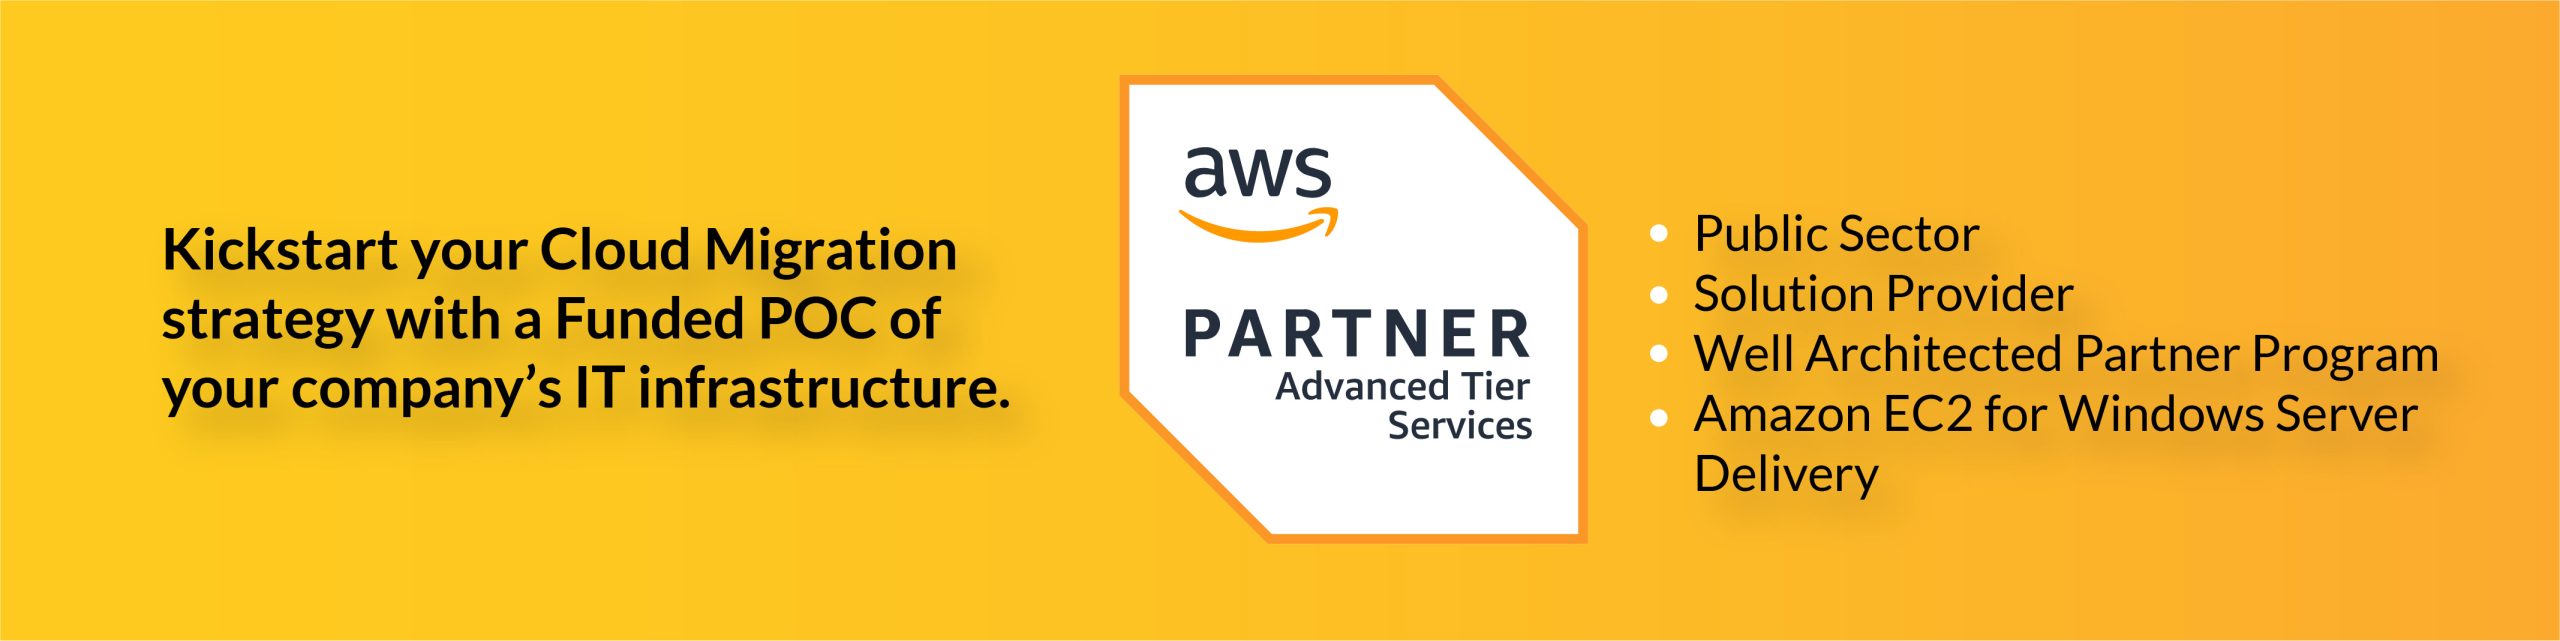 Managed Services on AWS